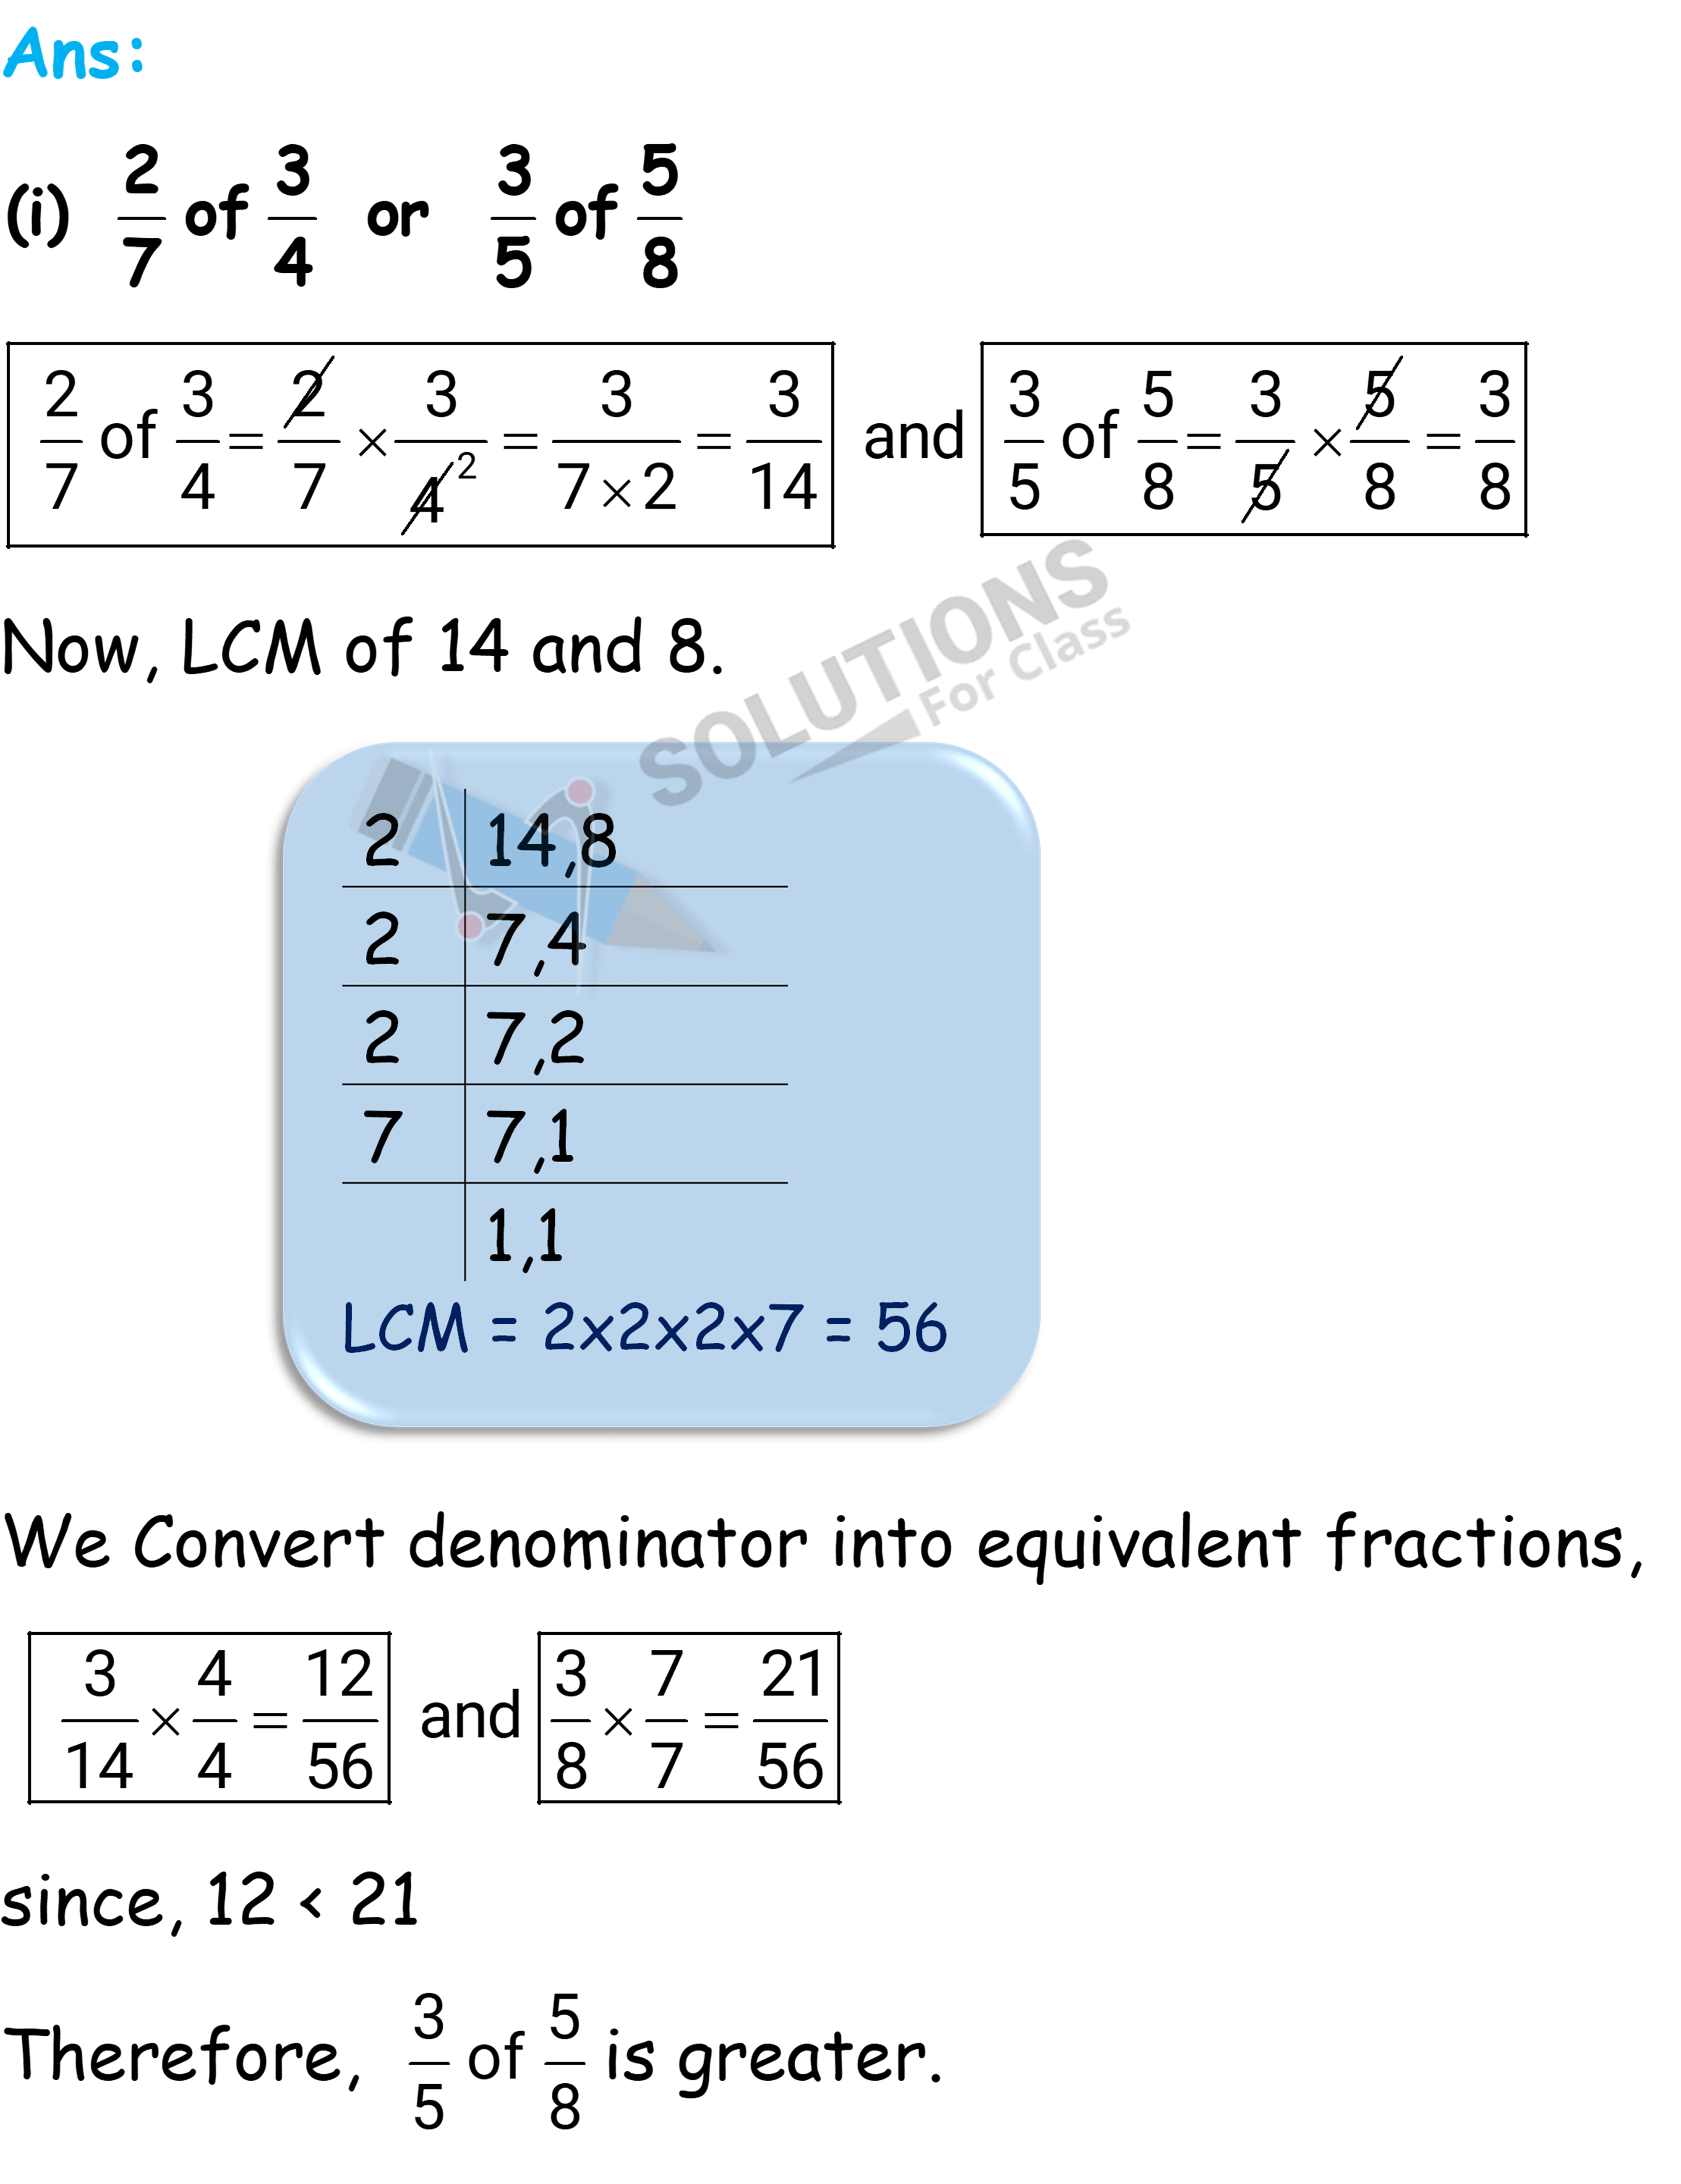 NCERT Solutions For Class 7 Chapter 2, Fractions and Decimals , Exercise 2.3 Q.4 (i)